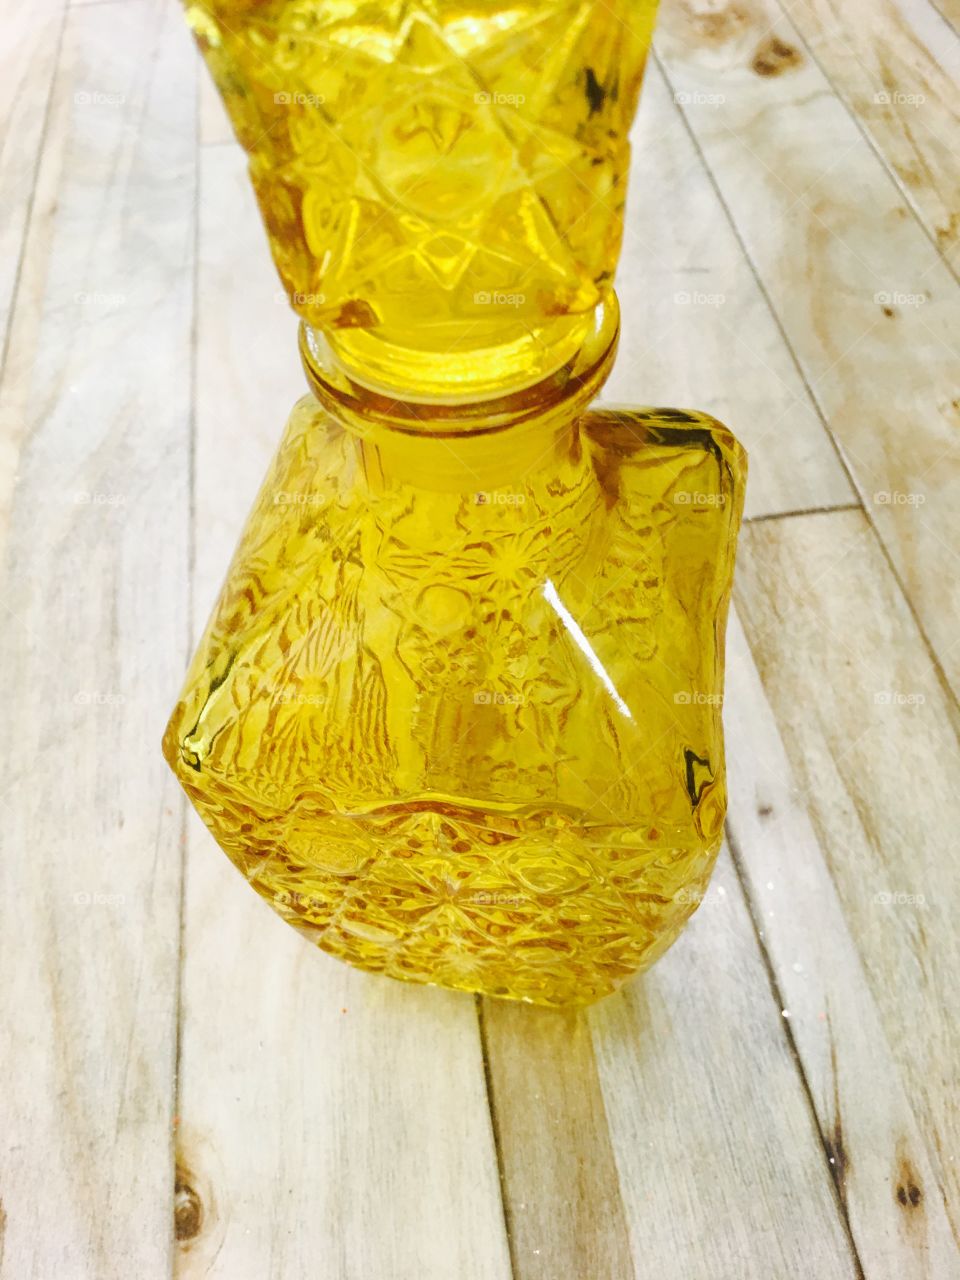 This capture is a representation of a yellow glass bottle.